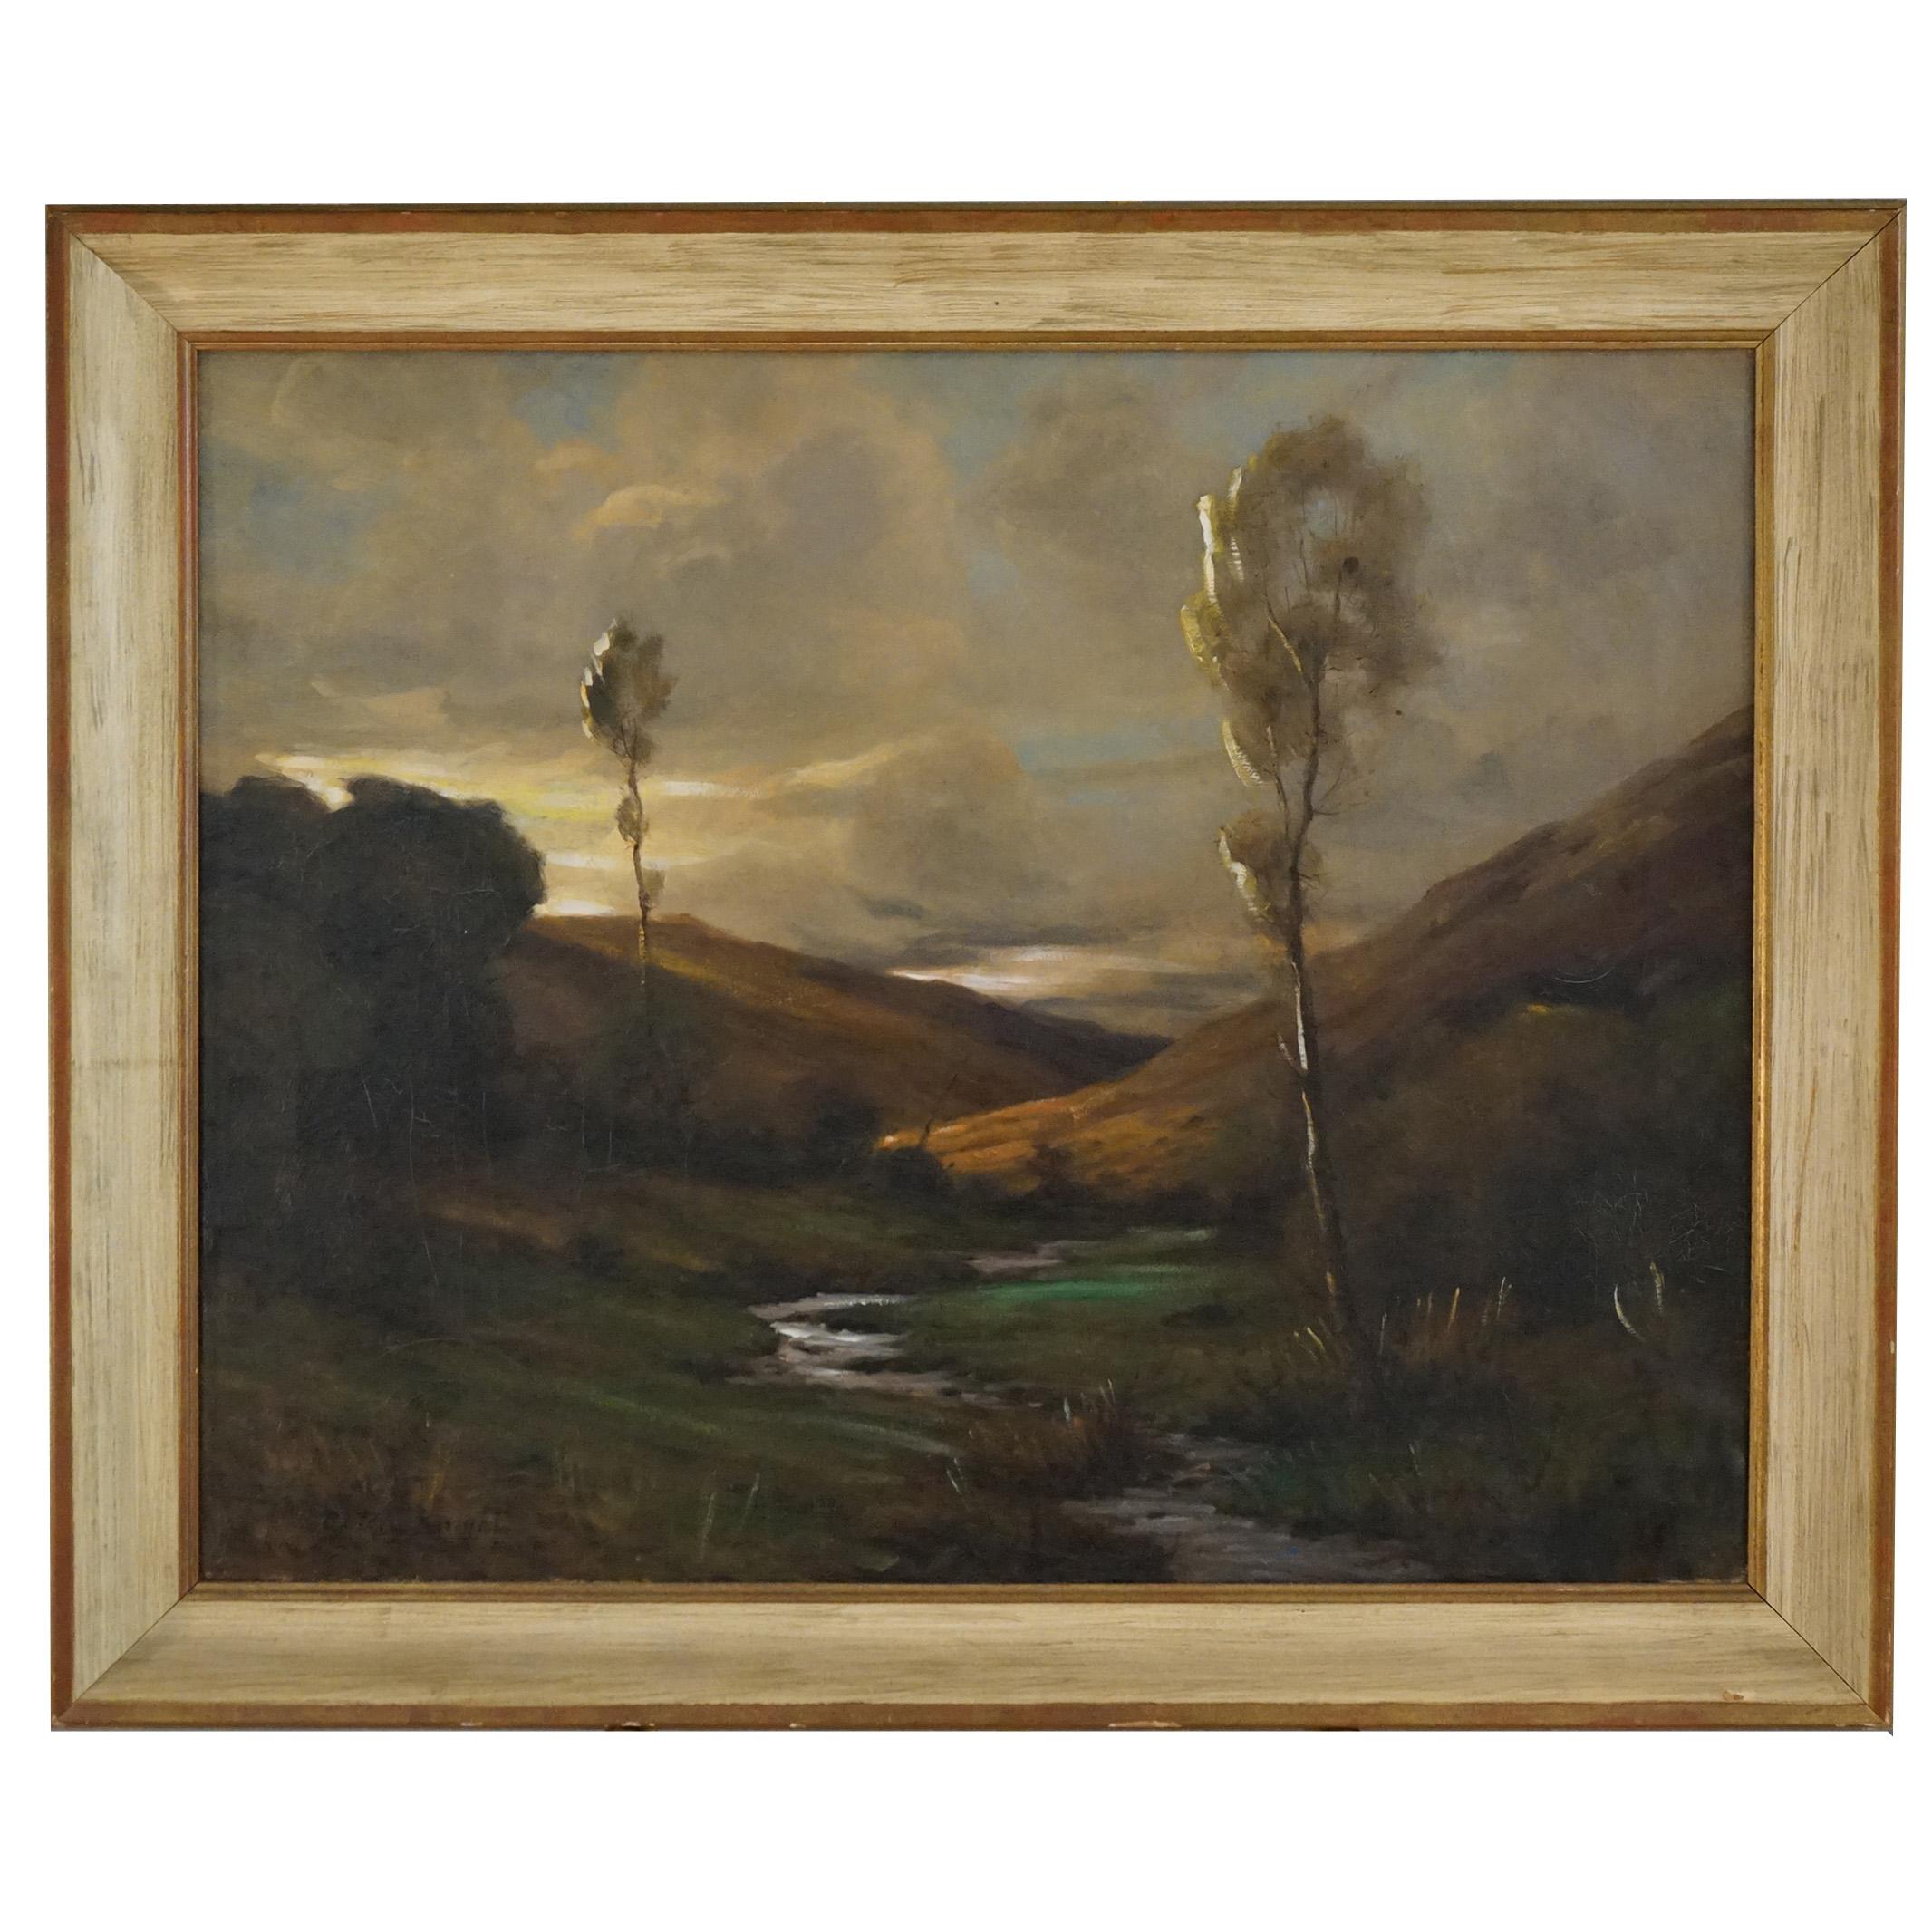 An antique Impressionistic painting by Louis Aston Knight offers oil on canvas landscape with river valley, artist signed, seated in wood frame, circa 1930

Measures - 31.5